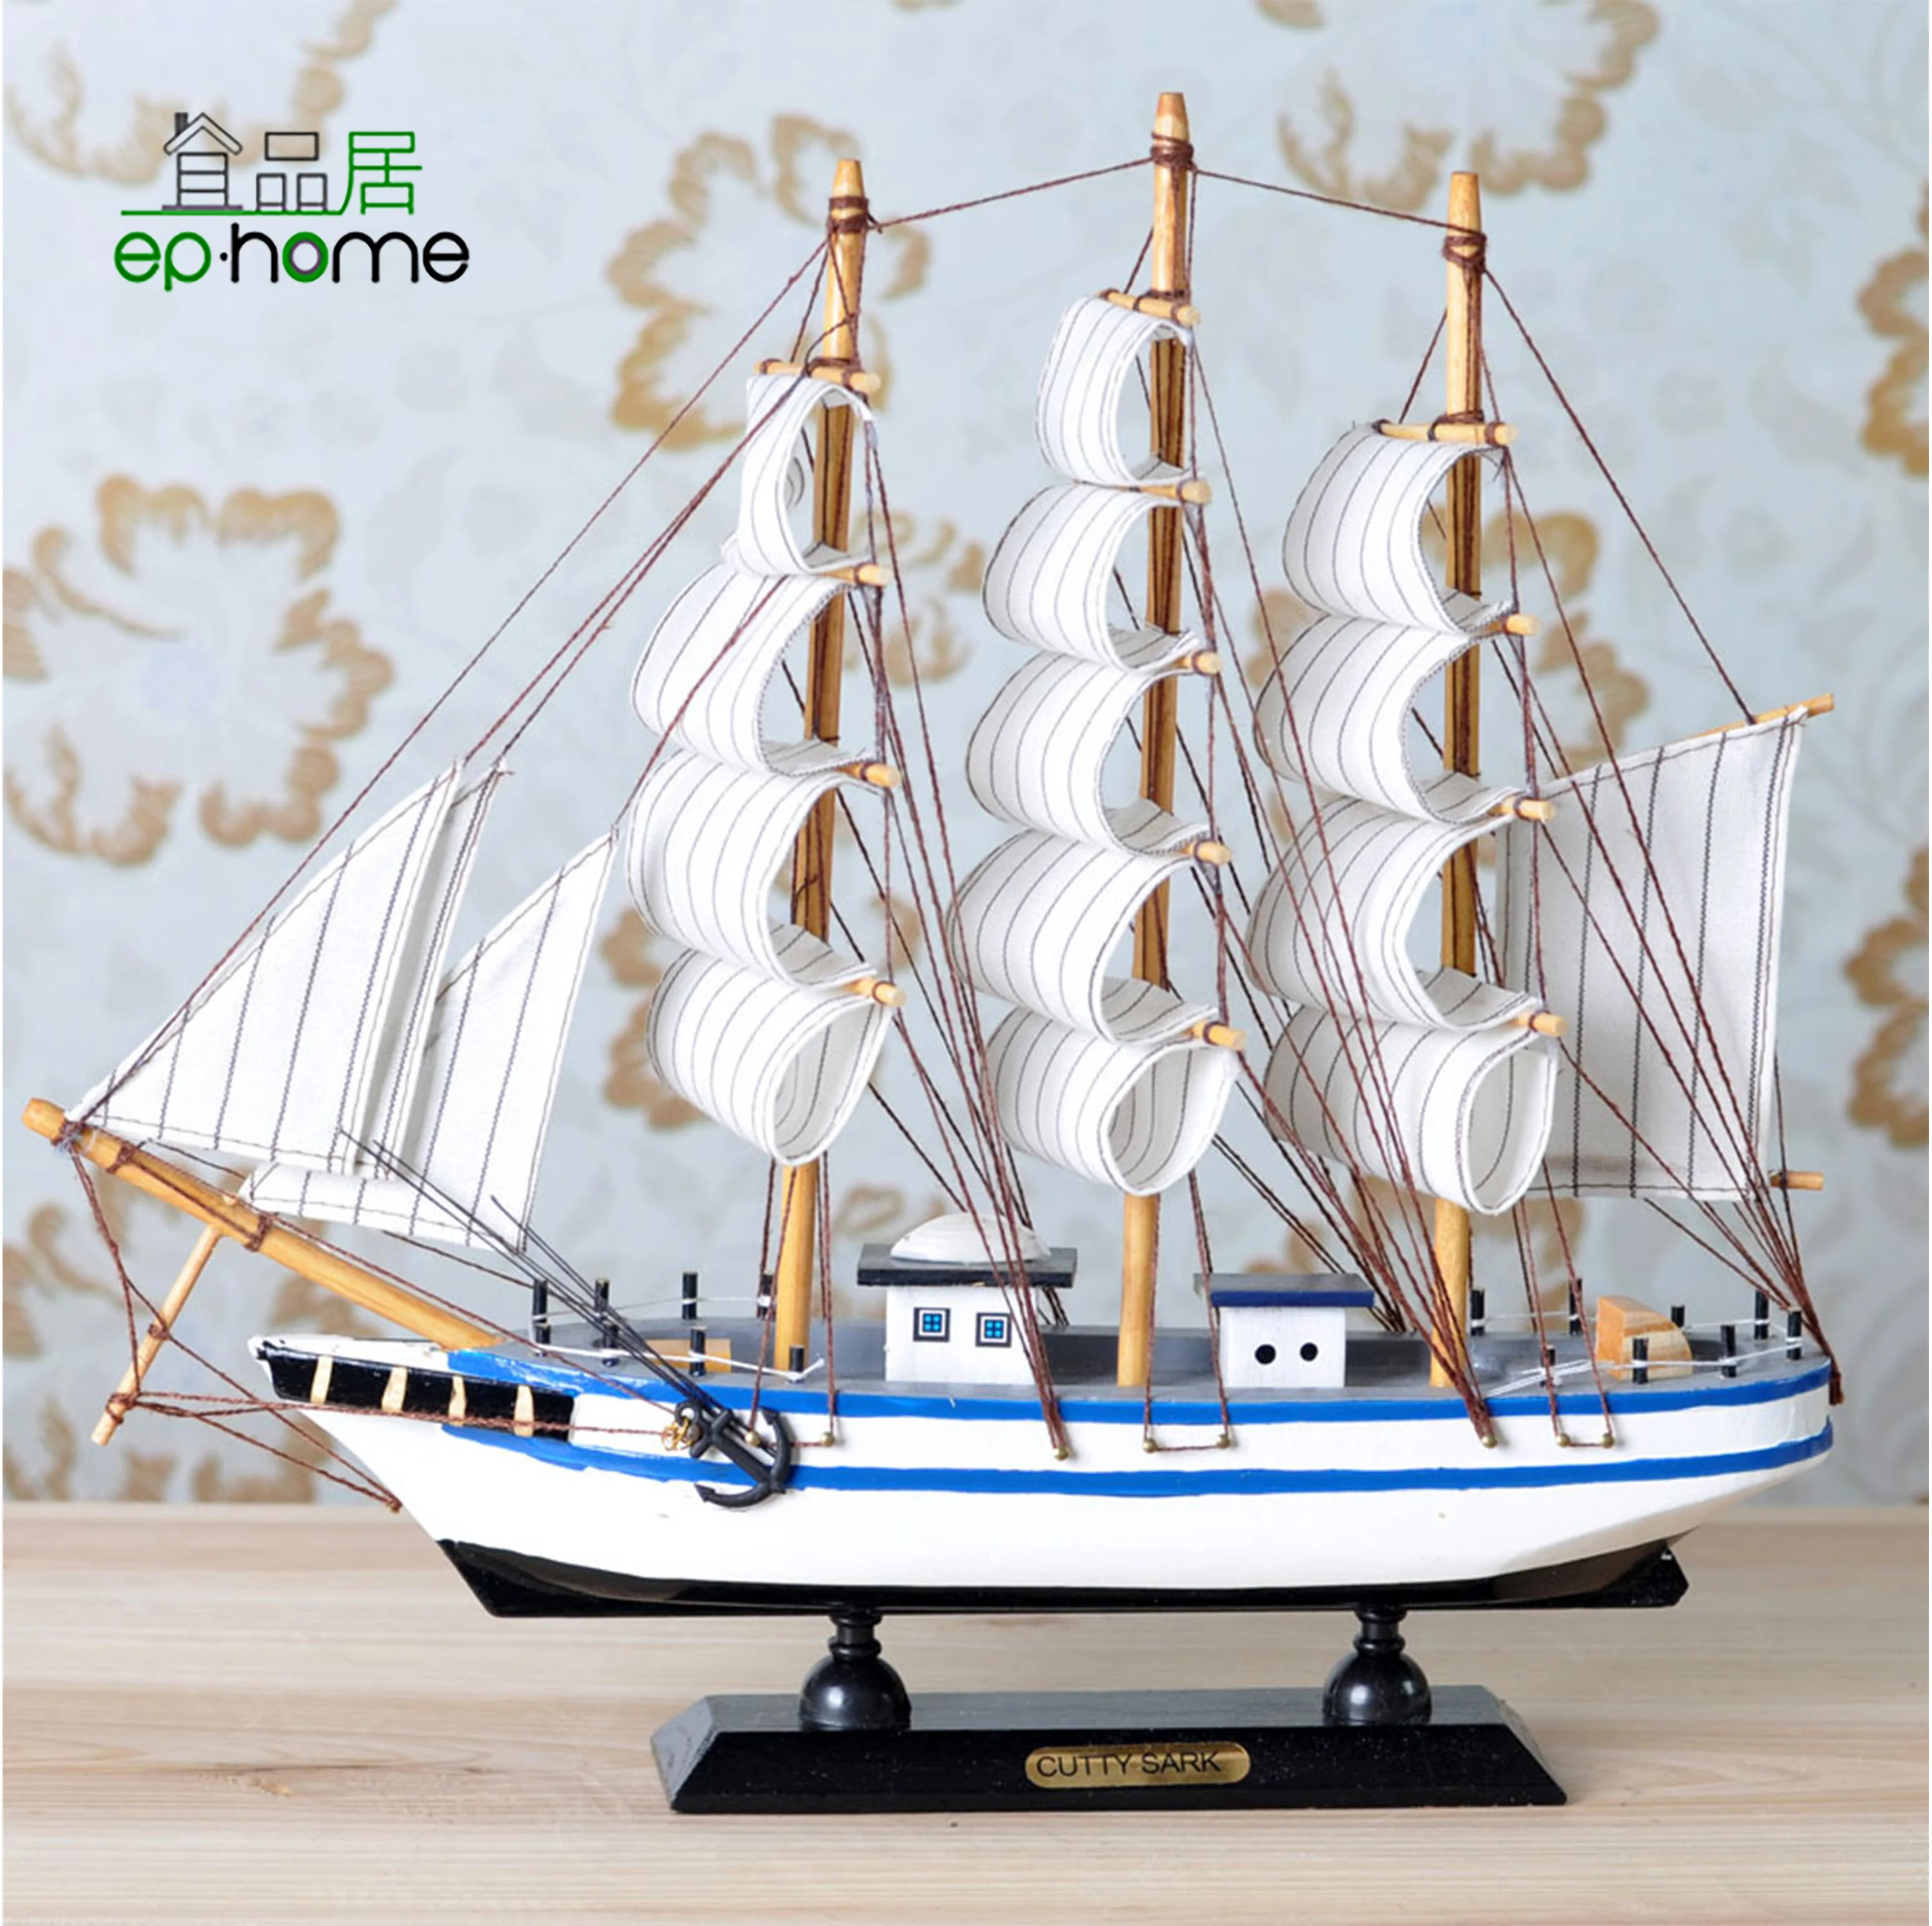 

Wooden Miniature Sailing Boat Model Handmade Vintage Nautical Sail Ship for Tabletop Ornament, Ocean Theme and Home Decor, White